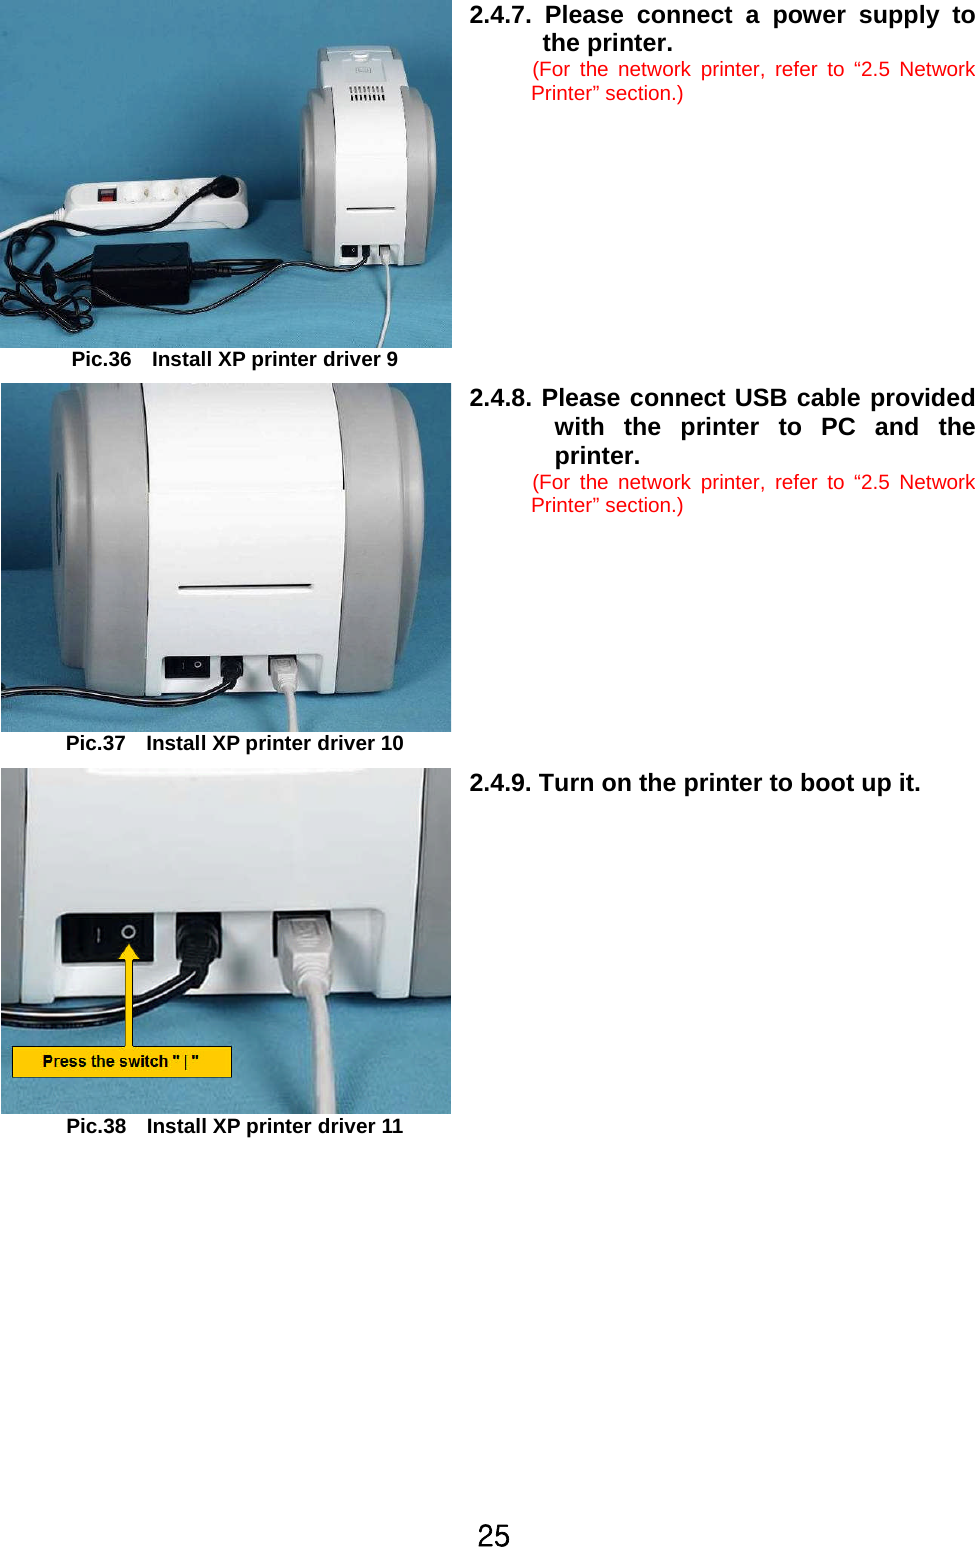 Y\Pic.36 Install XP printer driver 92.4.7. Please connect a power supplytothe printer.(For the network printer, refer to “2.5 NetworkPrinter” section.)Pic.37 Install XP printer driver 102.4.8.Please connect USB cable providedwith the printer to PC and theprinter.(For the network printer, refer to “2.5 NetworkPrinter” section.)Pic.38 Install XP printer driver 112.4.9. Turn on the printer to boot up it.